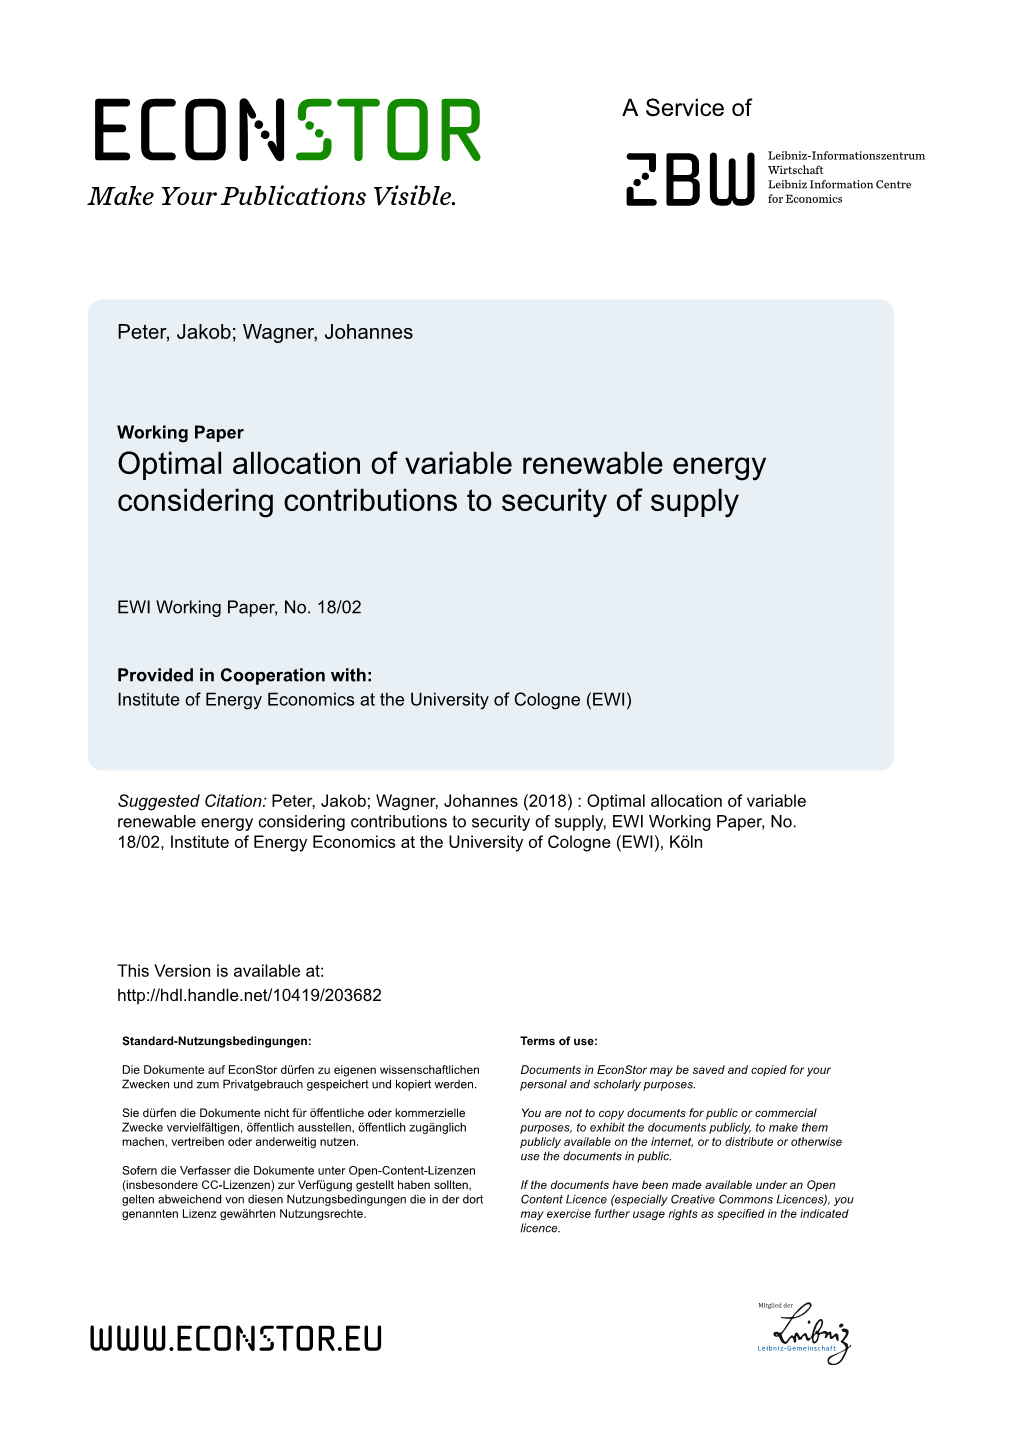 Optimal Allocation of Variable Renewable Energy Considering Contributions to Security of Supply